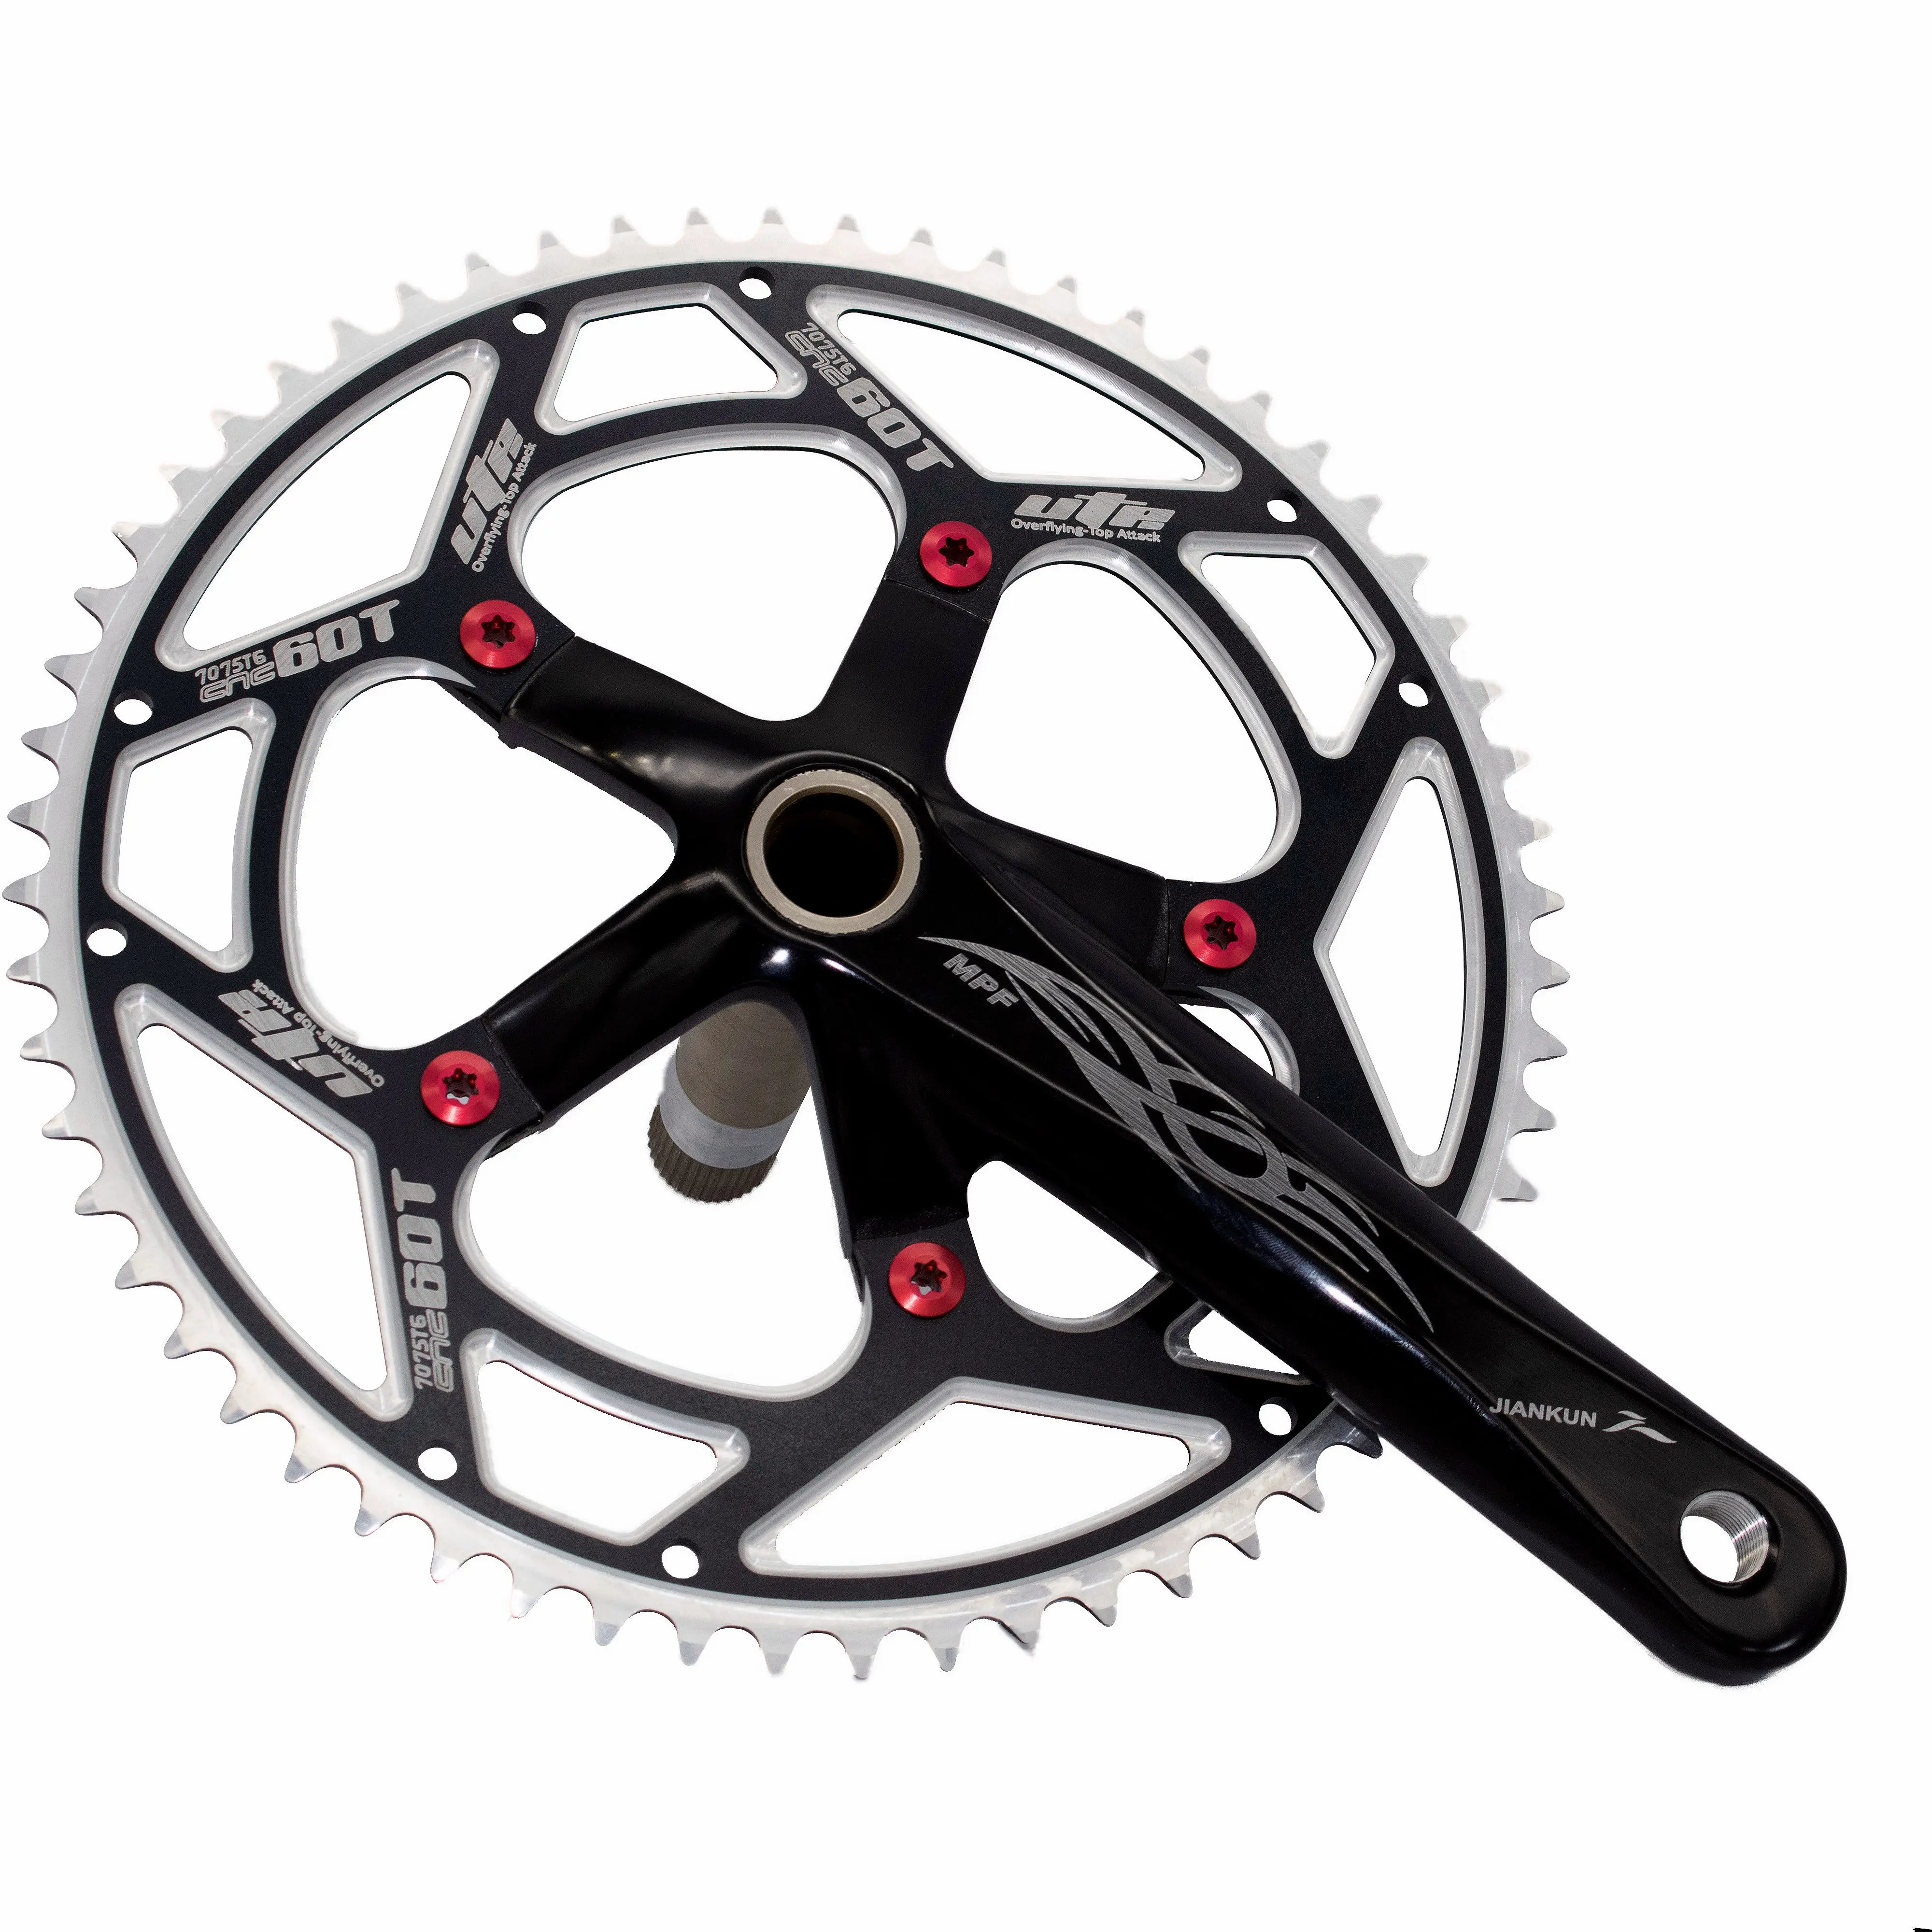 Alloy Bicycle Chainset For Fixie / Folding / Trekking Black 44T x 170mm 